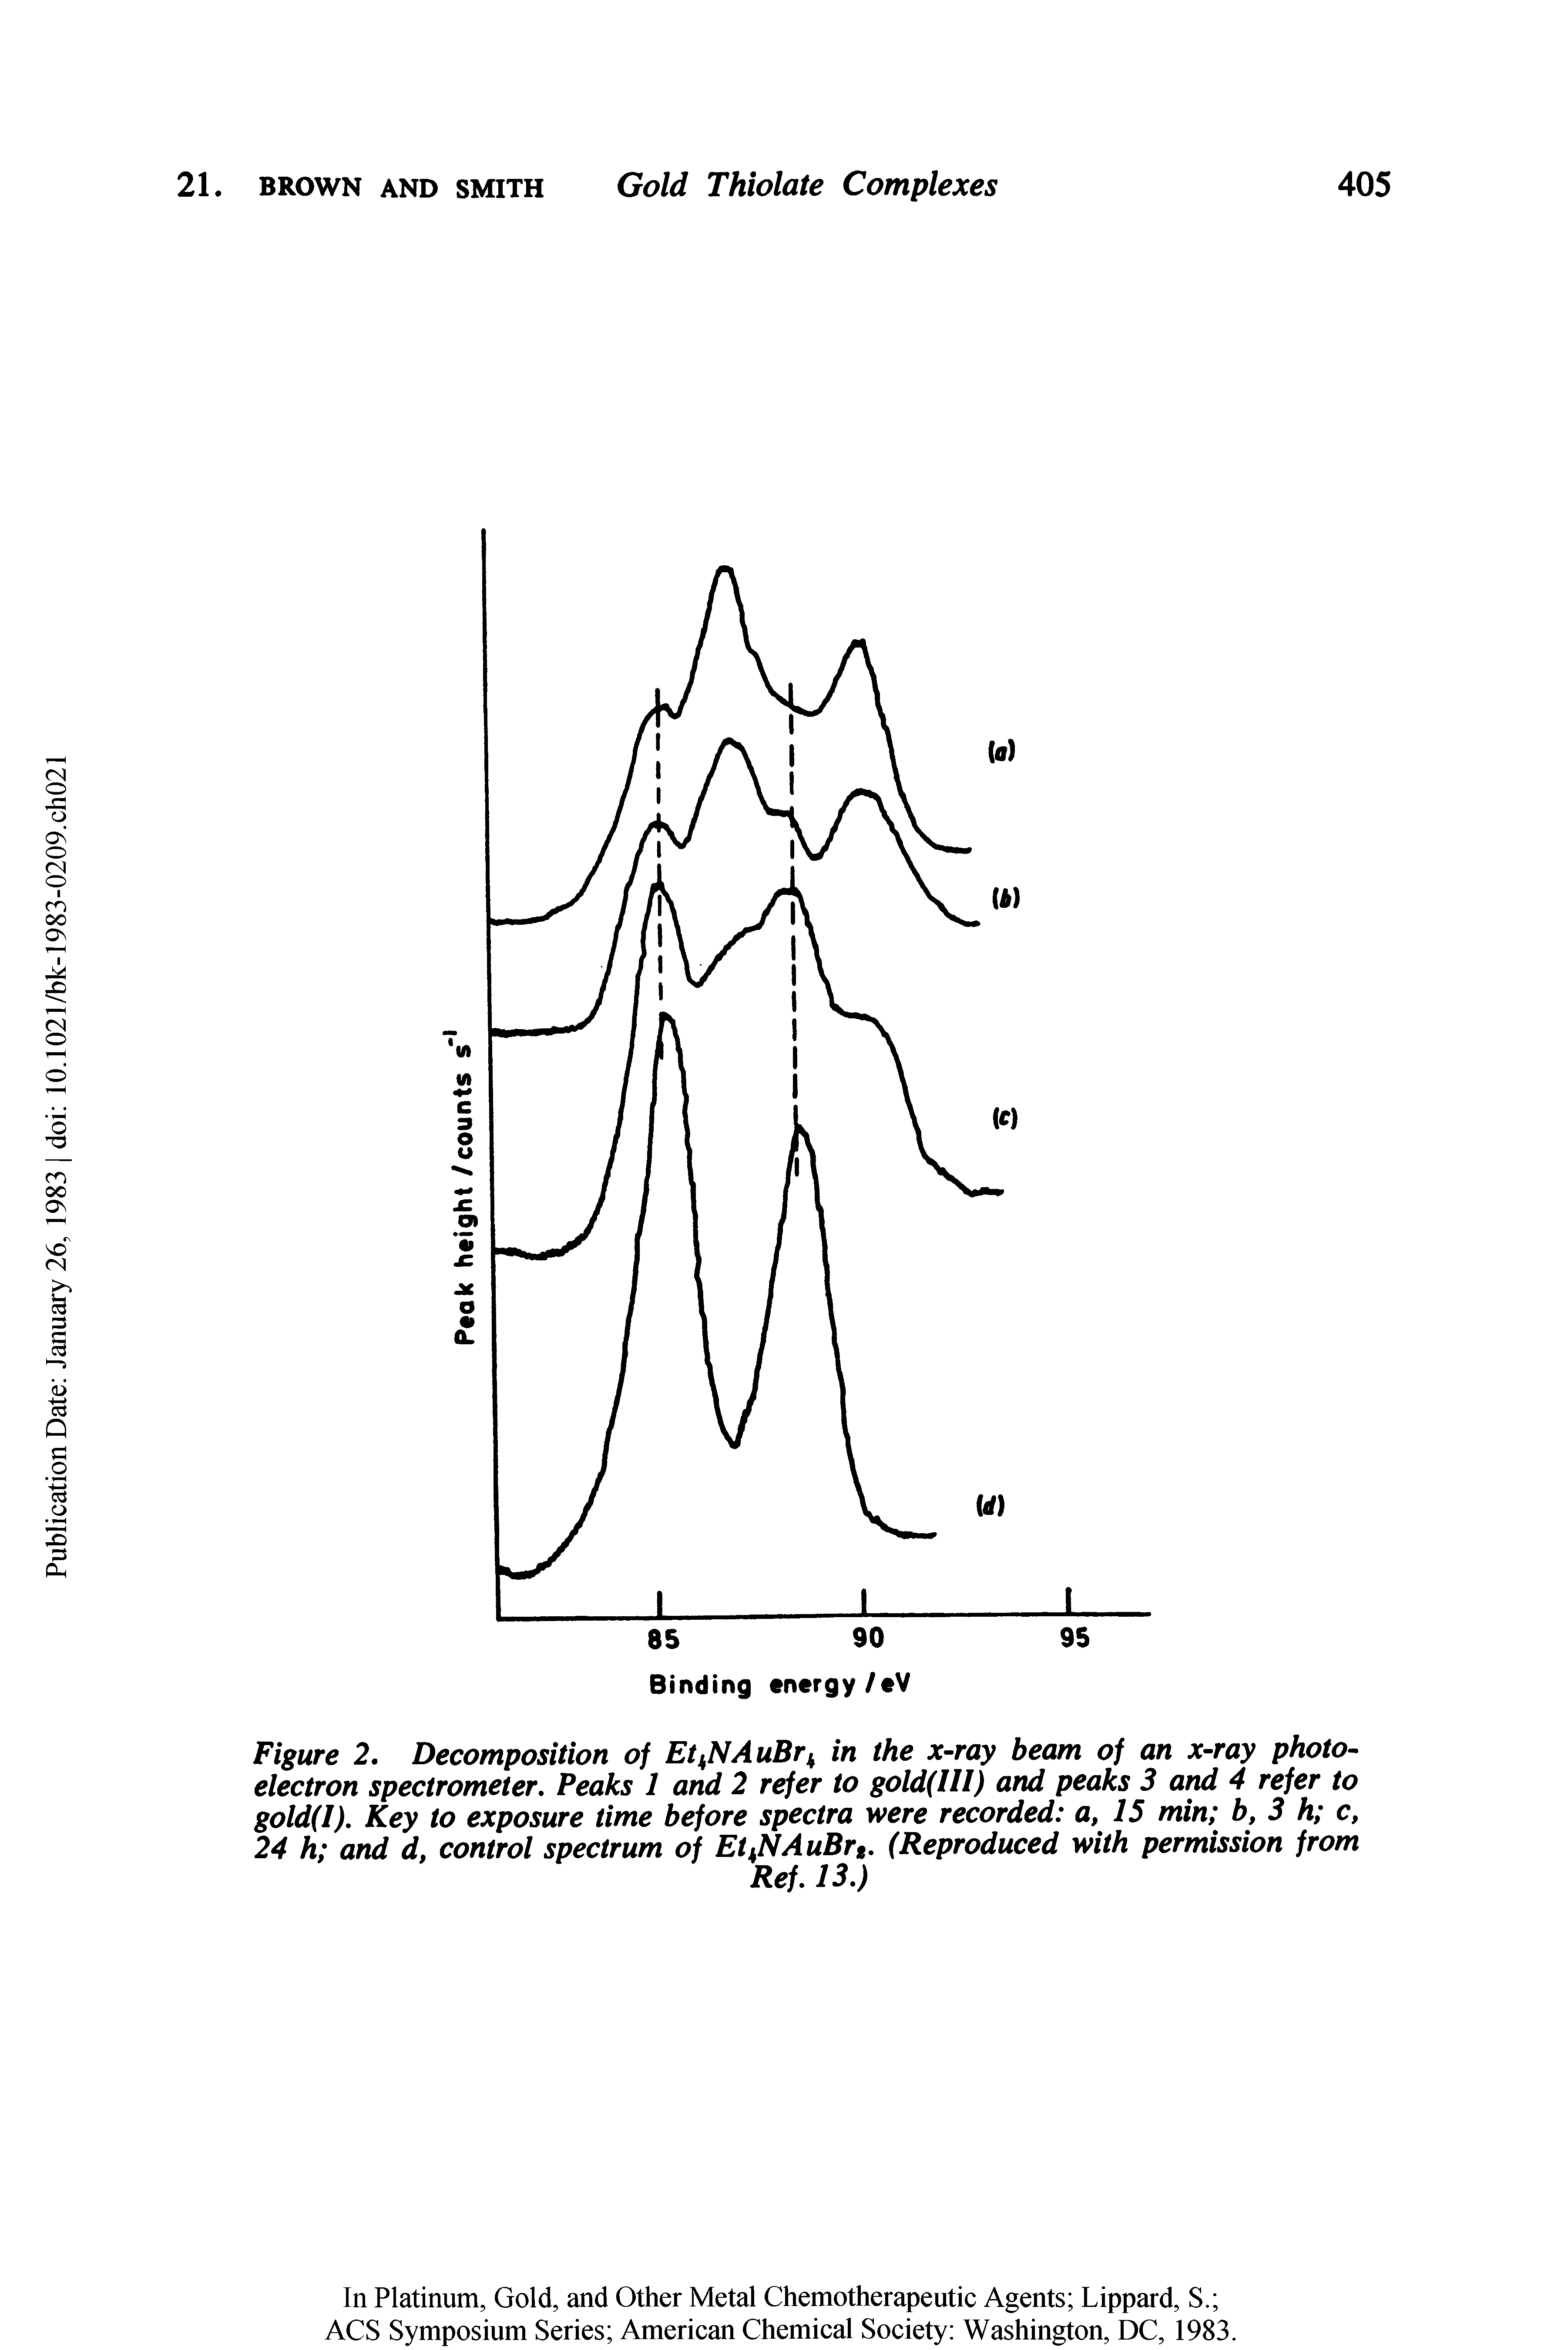 Figure 2. Decomposition of Et NAuBr, in the x-ray beam of an x-ray photoelectron spectrometer. Peaks 1 and 2 refer to gold(lll) and peaks 3 and 4 refer to gold(I). Key to exposure time before spectra were recorded a, 15 min b, 3 h c, 24 h and d, control spectrum of Et NAuBrt. (Reproduced with permission from...